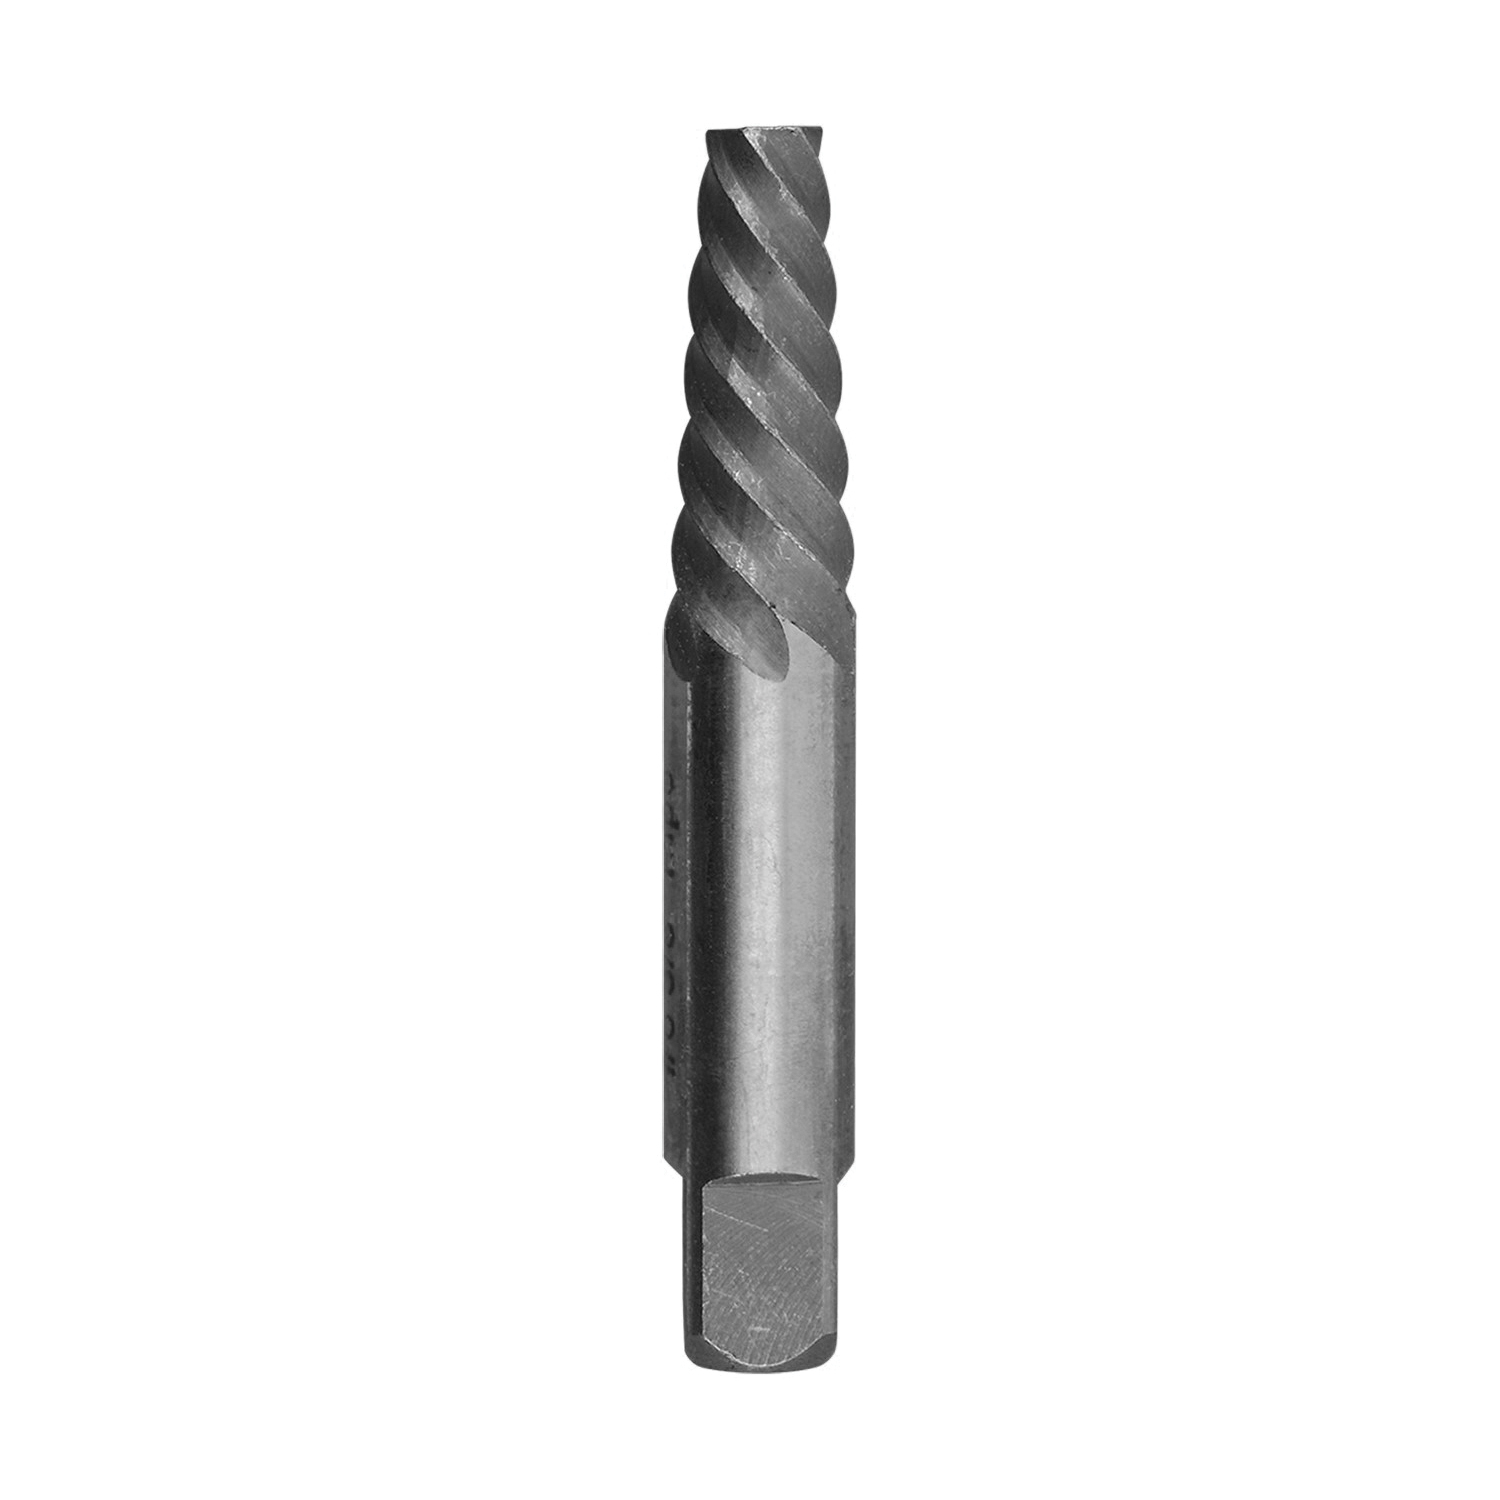 PASCO 4829 Nipple and Screw Extractor, 3/8 in Extractor, 13/32 in Drill, For Screw Size: 5/8 to 7/8 in